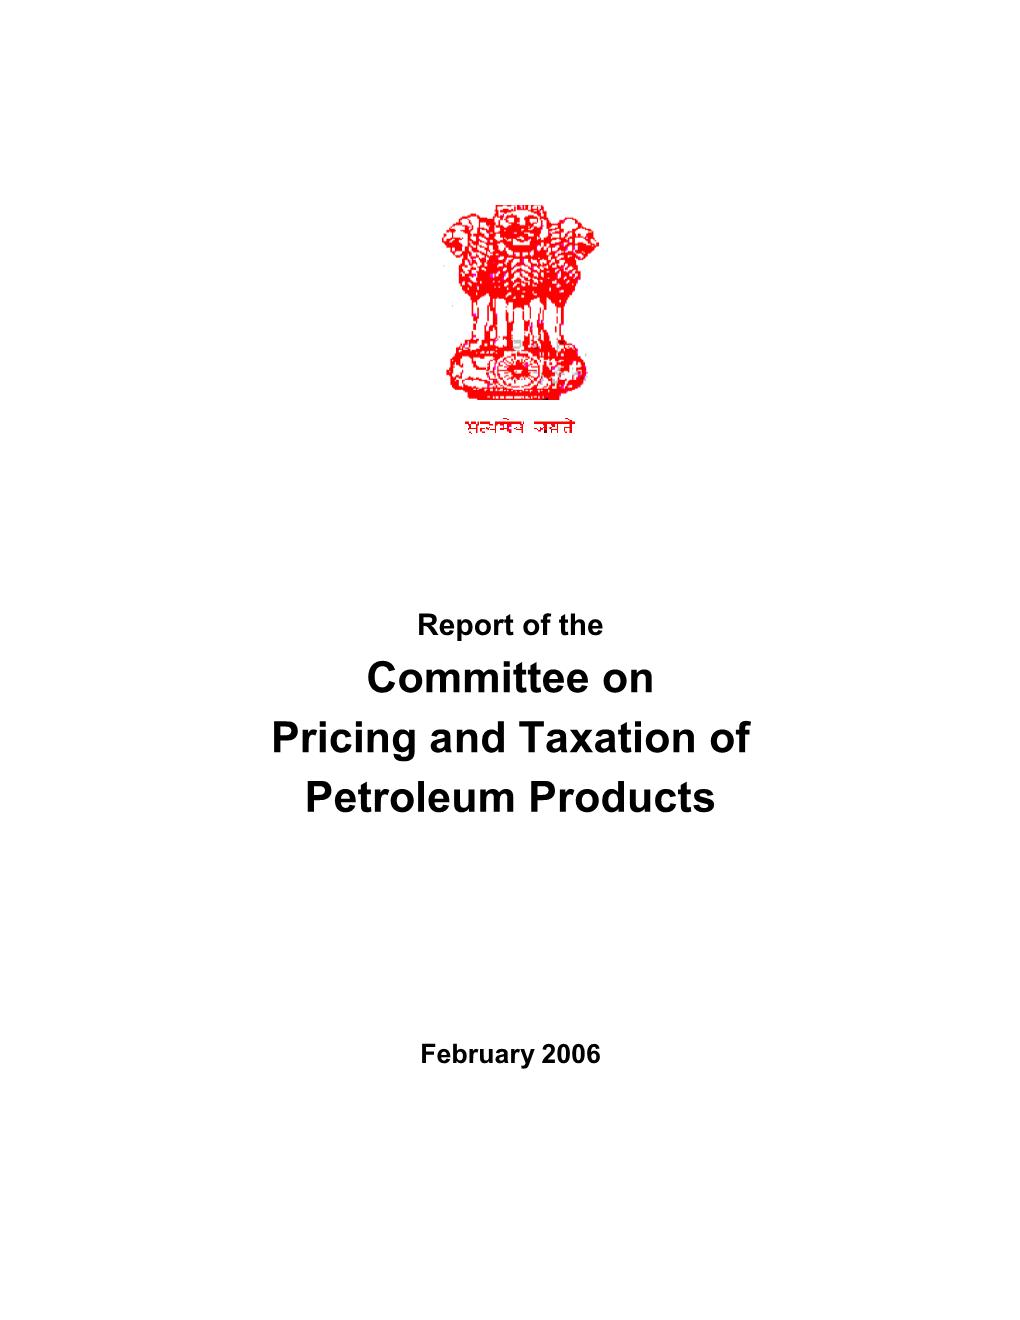 Committee on Pricing and Taxation of Petroleum Products